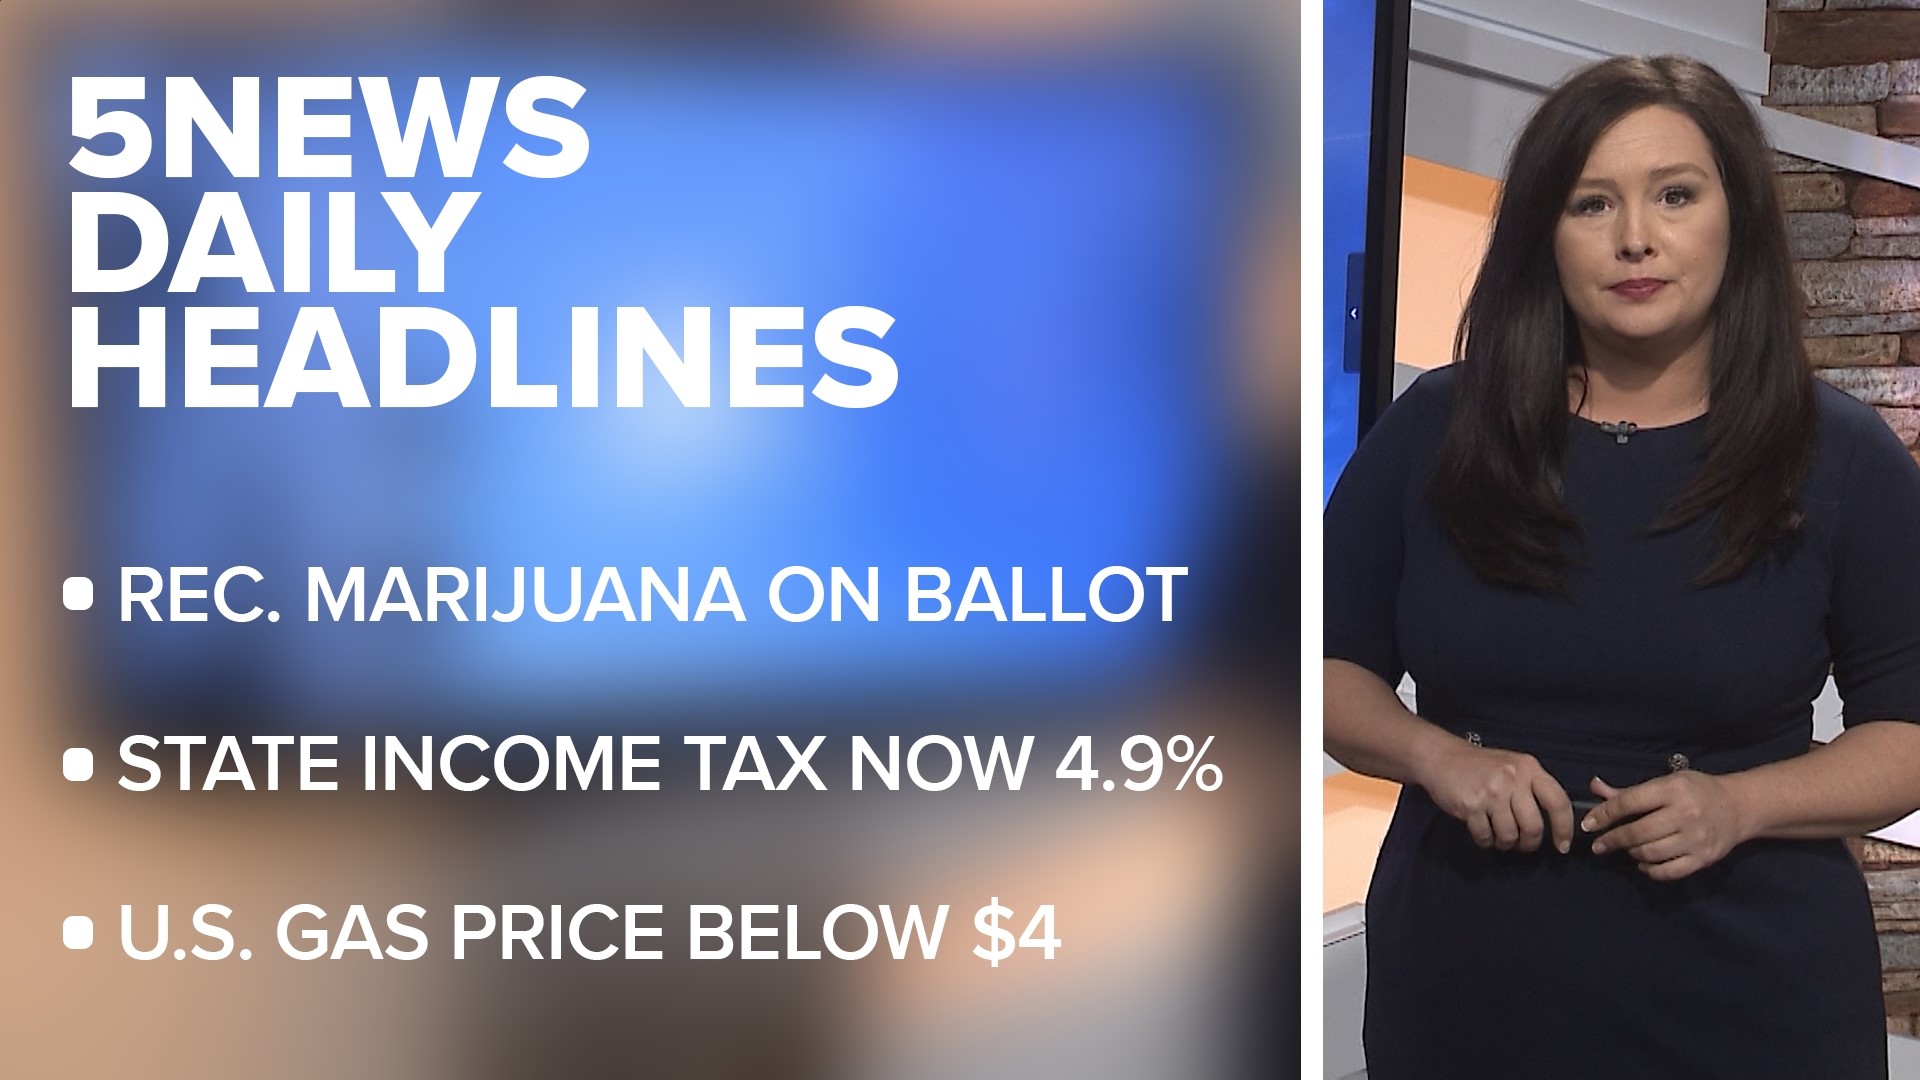 Recreational marijuana is now conditionally on the Nov. ballot, Arkansas state income tax lowered to 4.9% and gas prices in the US are now below $4 on average.